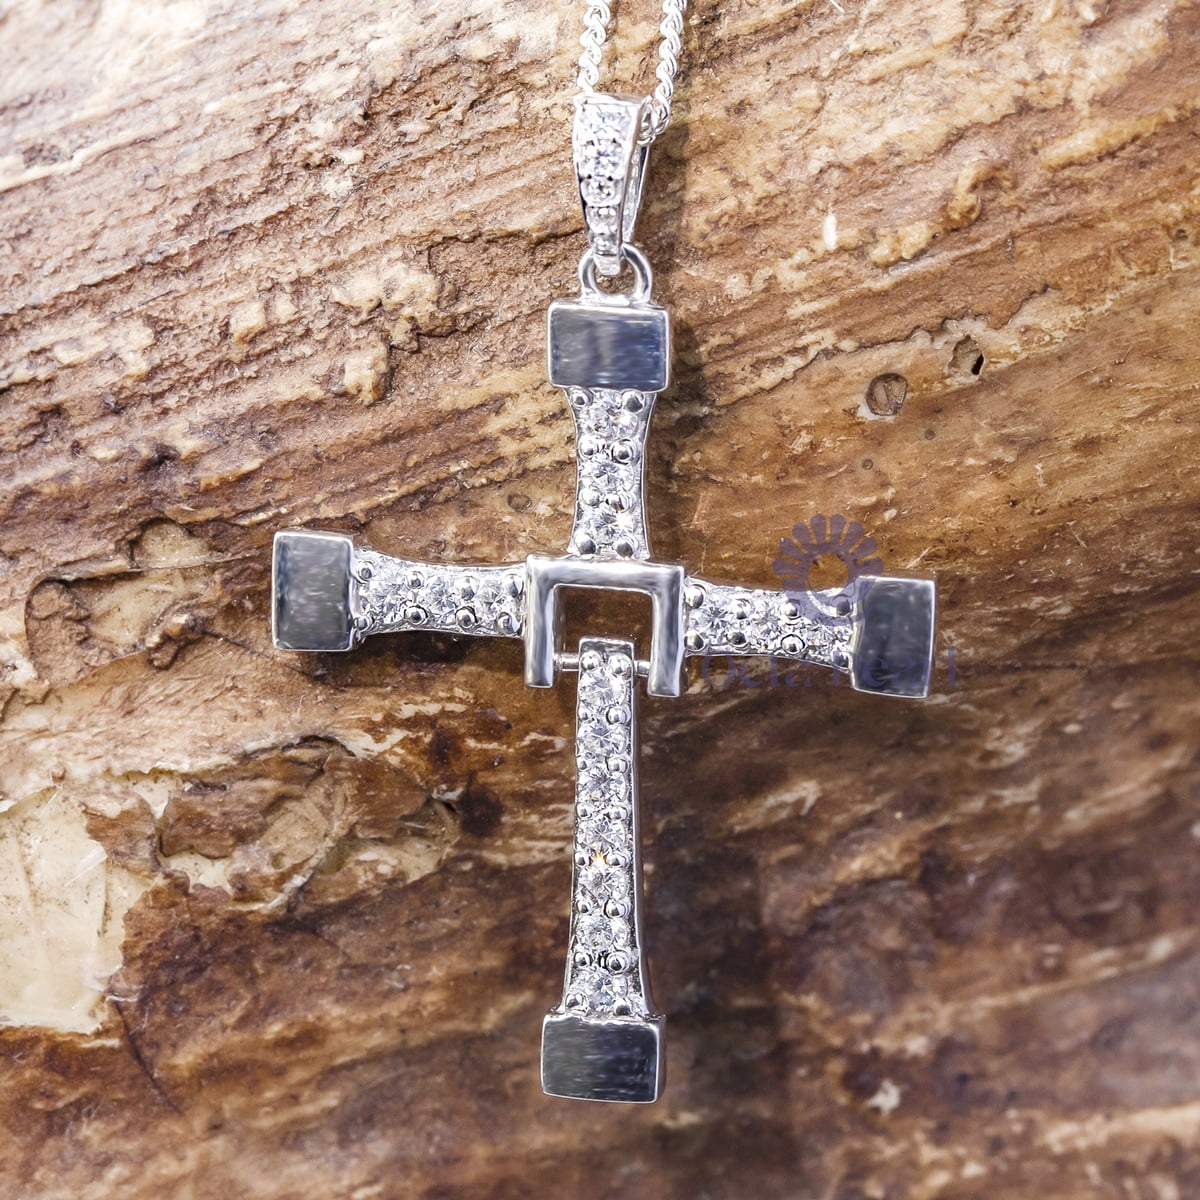 Round Cut Moissanite The Fast & The Furious Inspire Cross Pendant For Men (4/9 TCW)